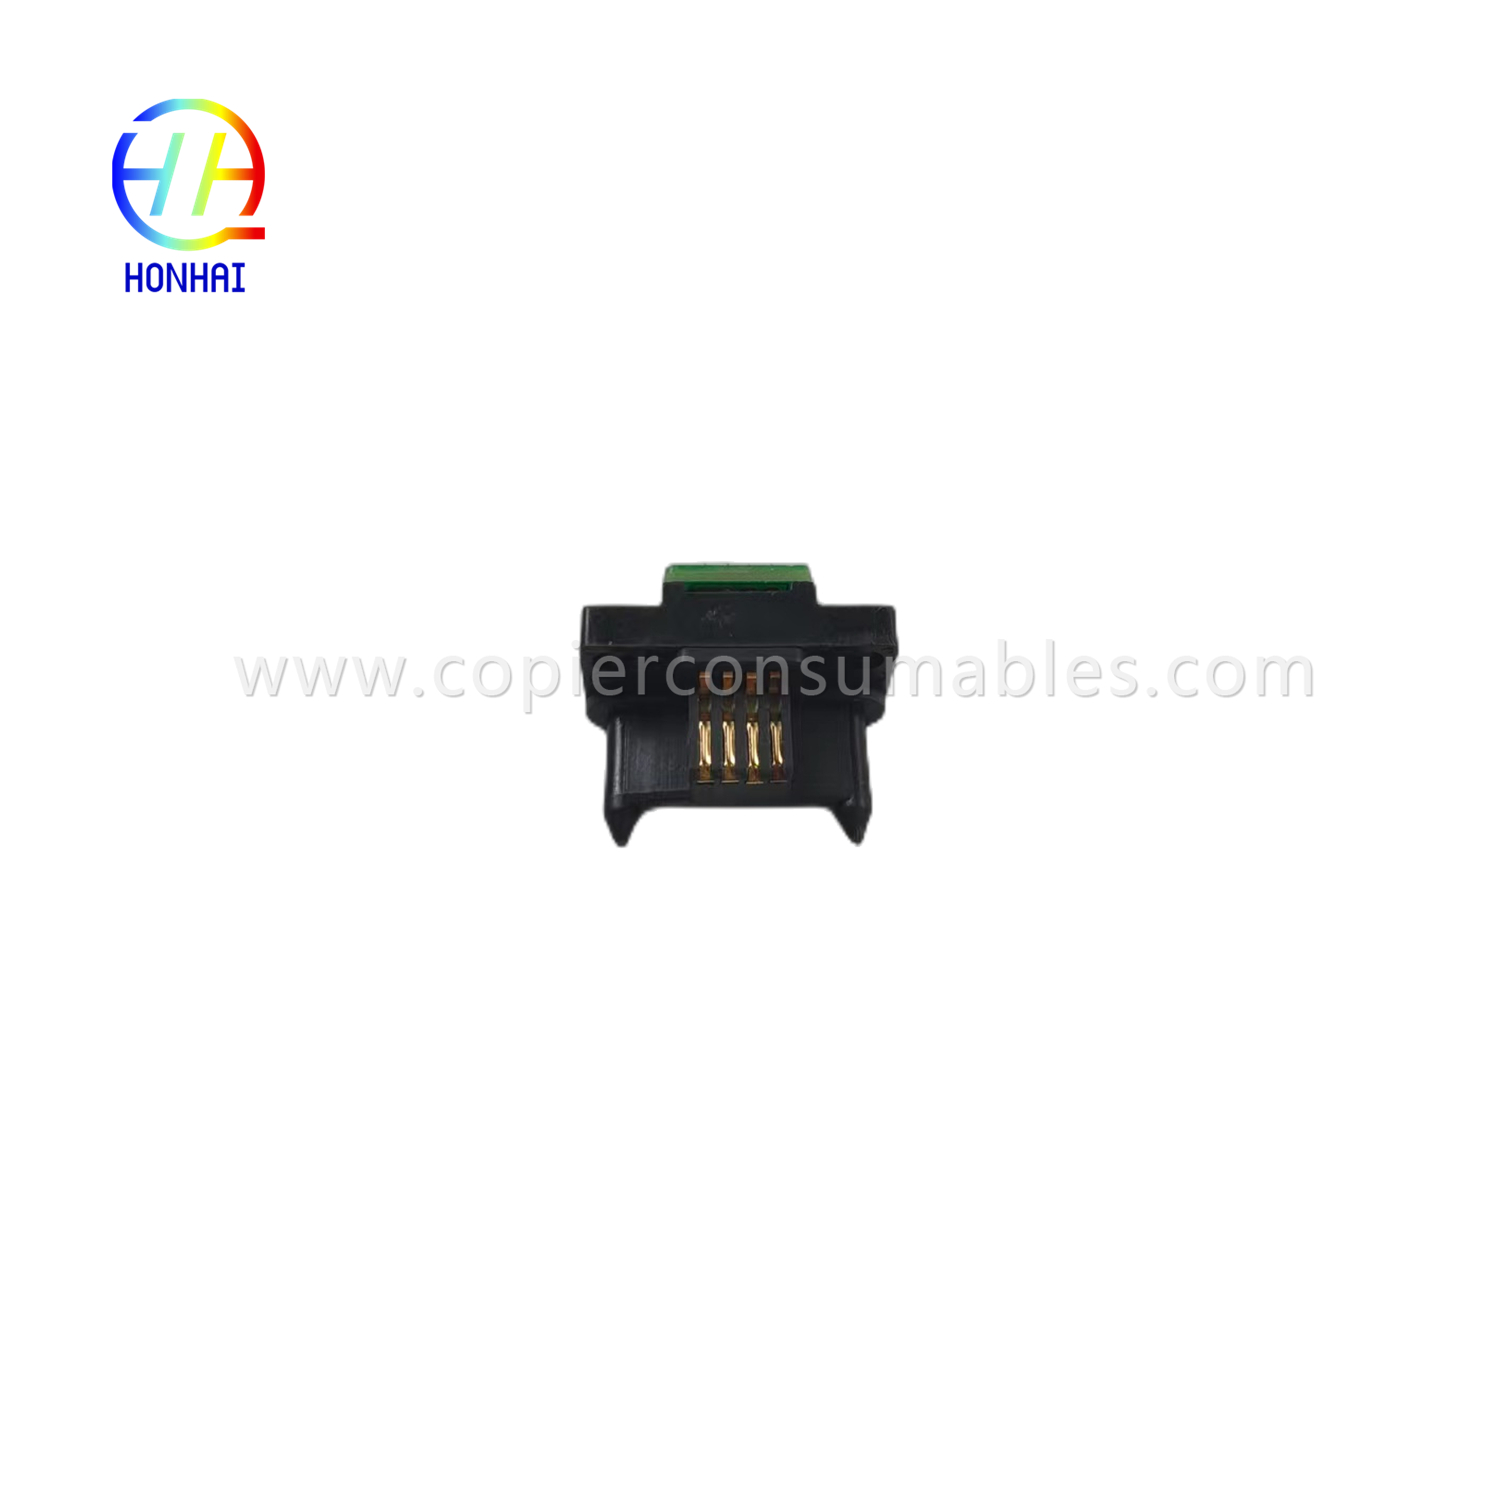 Drum Chip Xerox 113R00673 113R673 Workcentre 5755 5875 5865 5845 5855 5875 5890 Chip (3)_副本